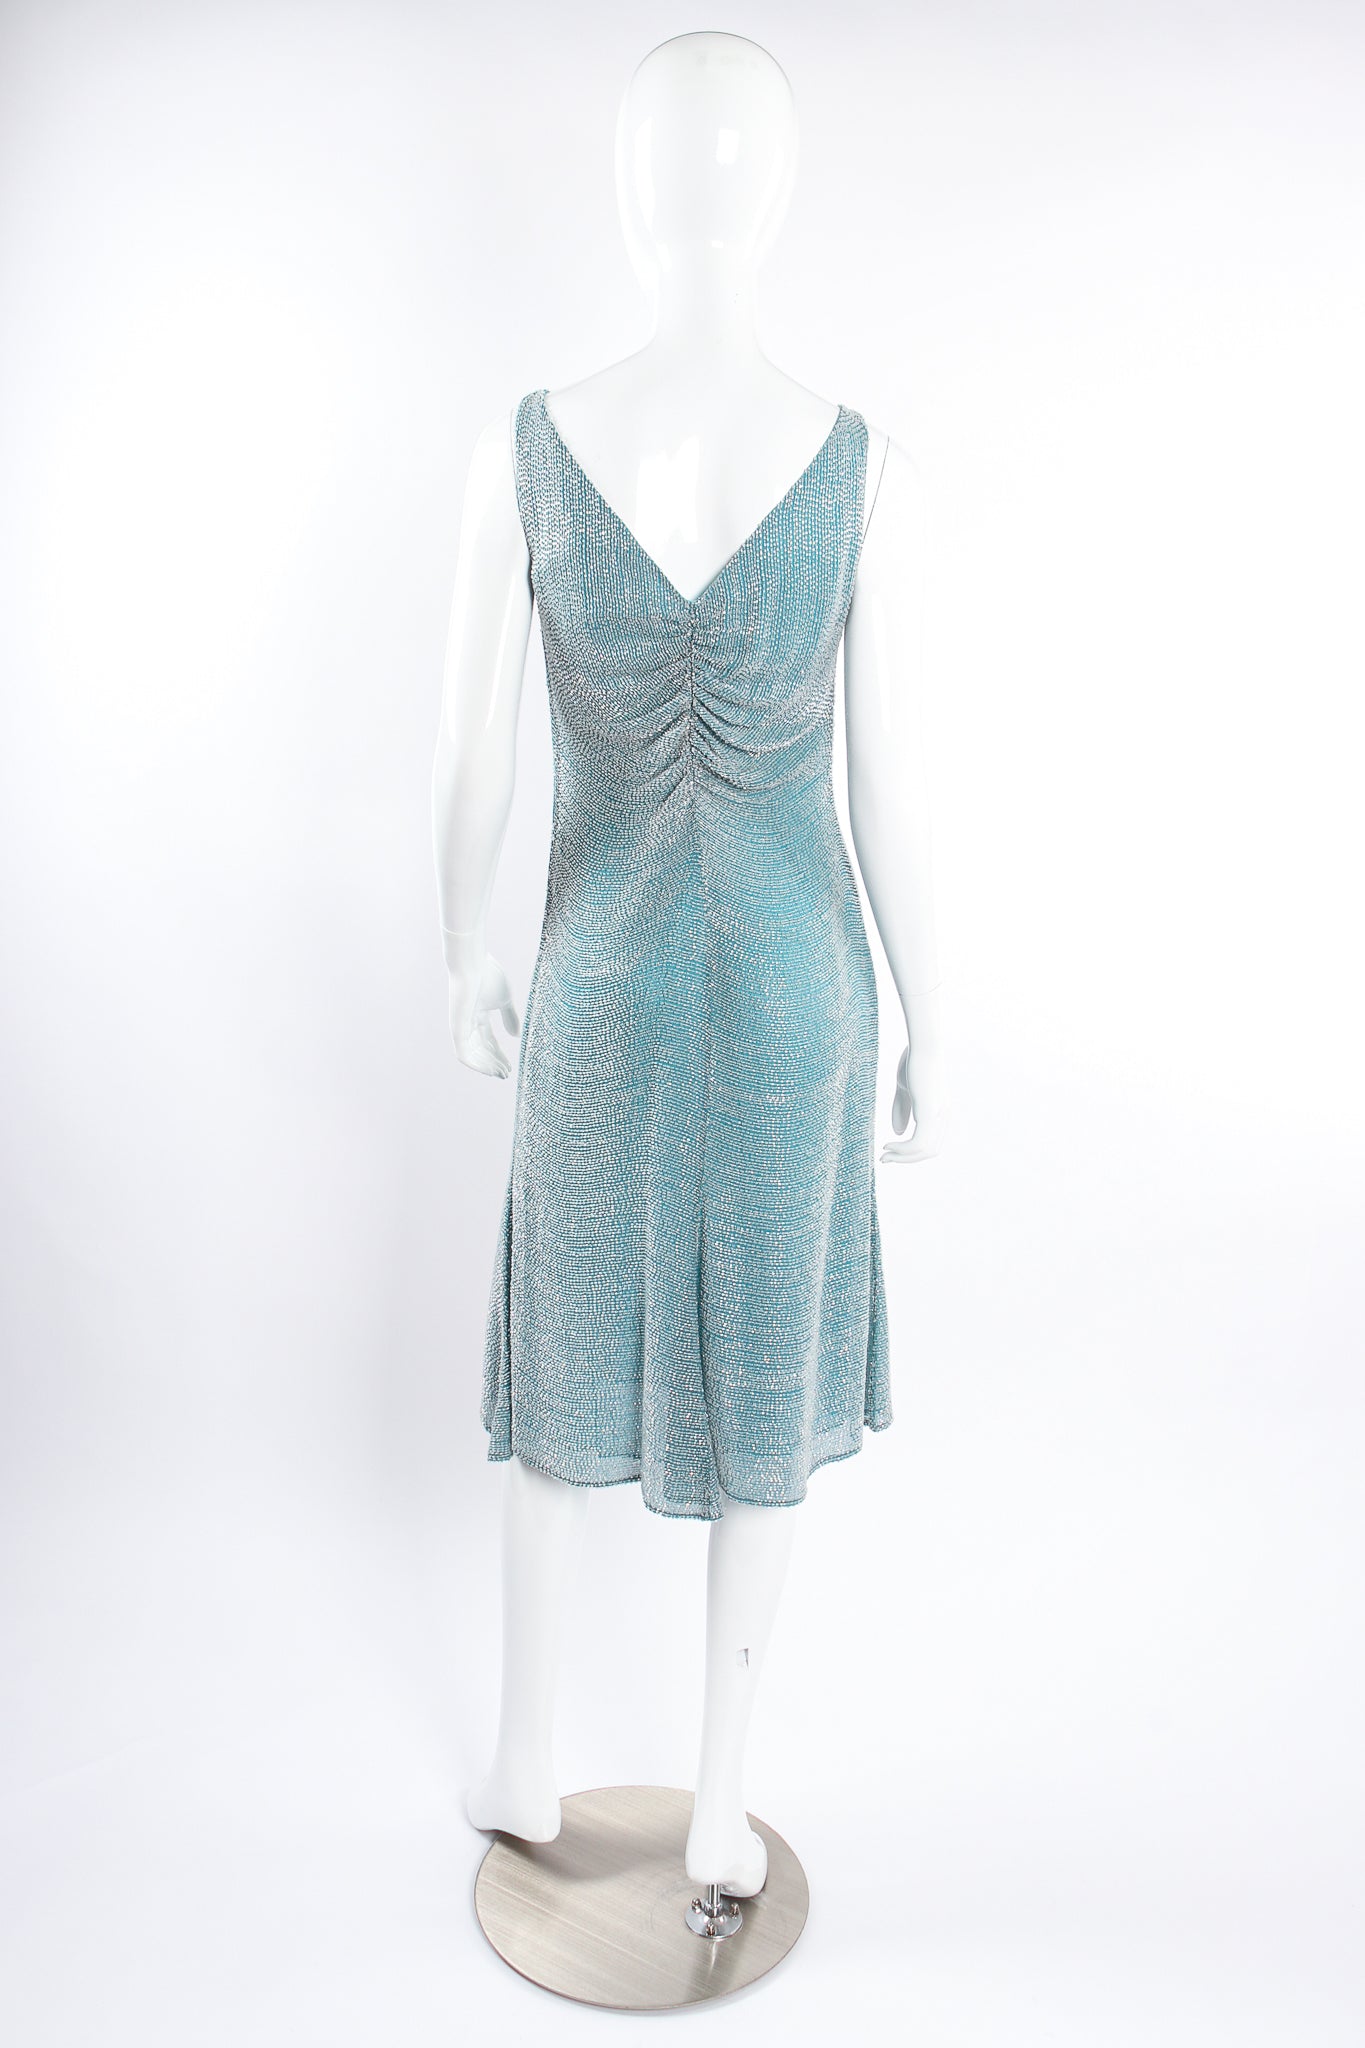 Vintage Badgley Mischka Beaded Ruched Bodice Dress on Mannequin back at Recess Los Angeles